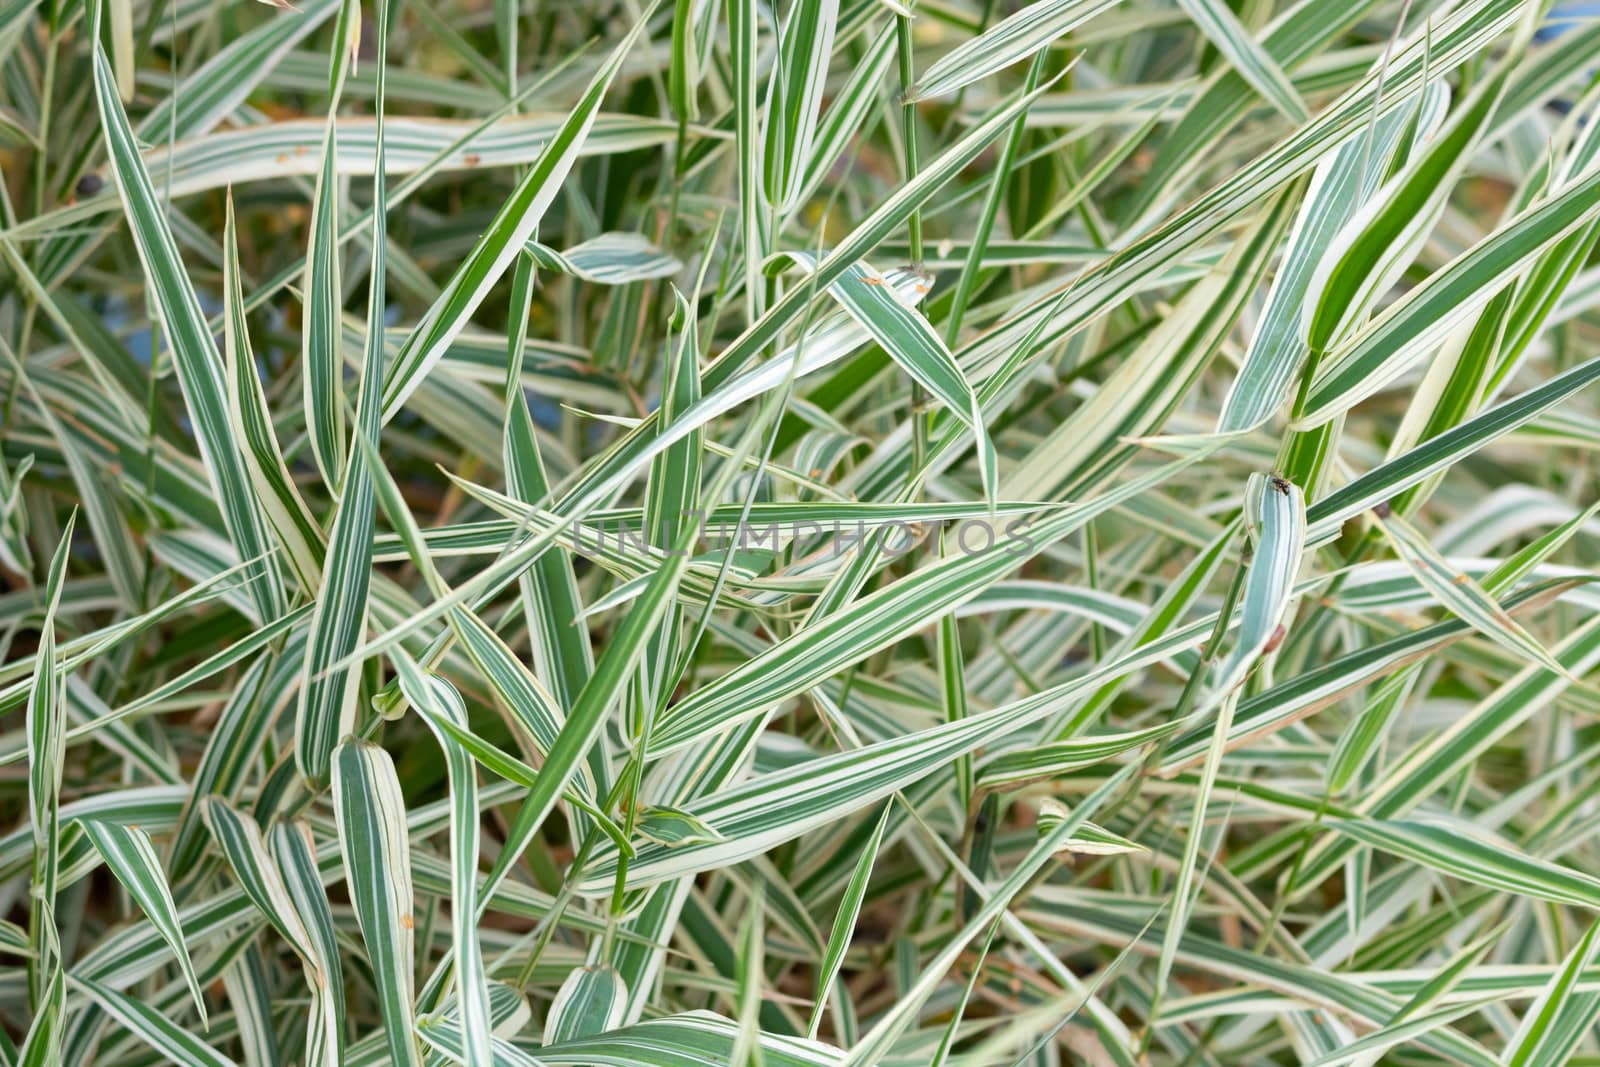 Green and white leaves of Phalaris arundinacea, also known as reed Canary grass.